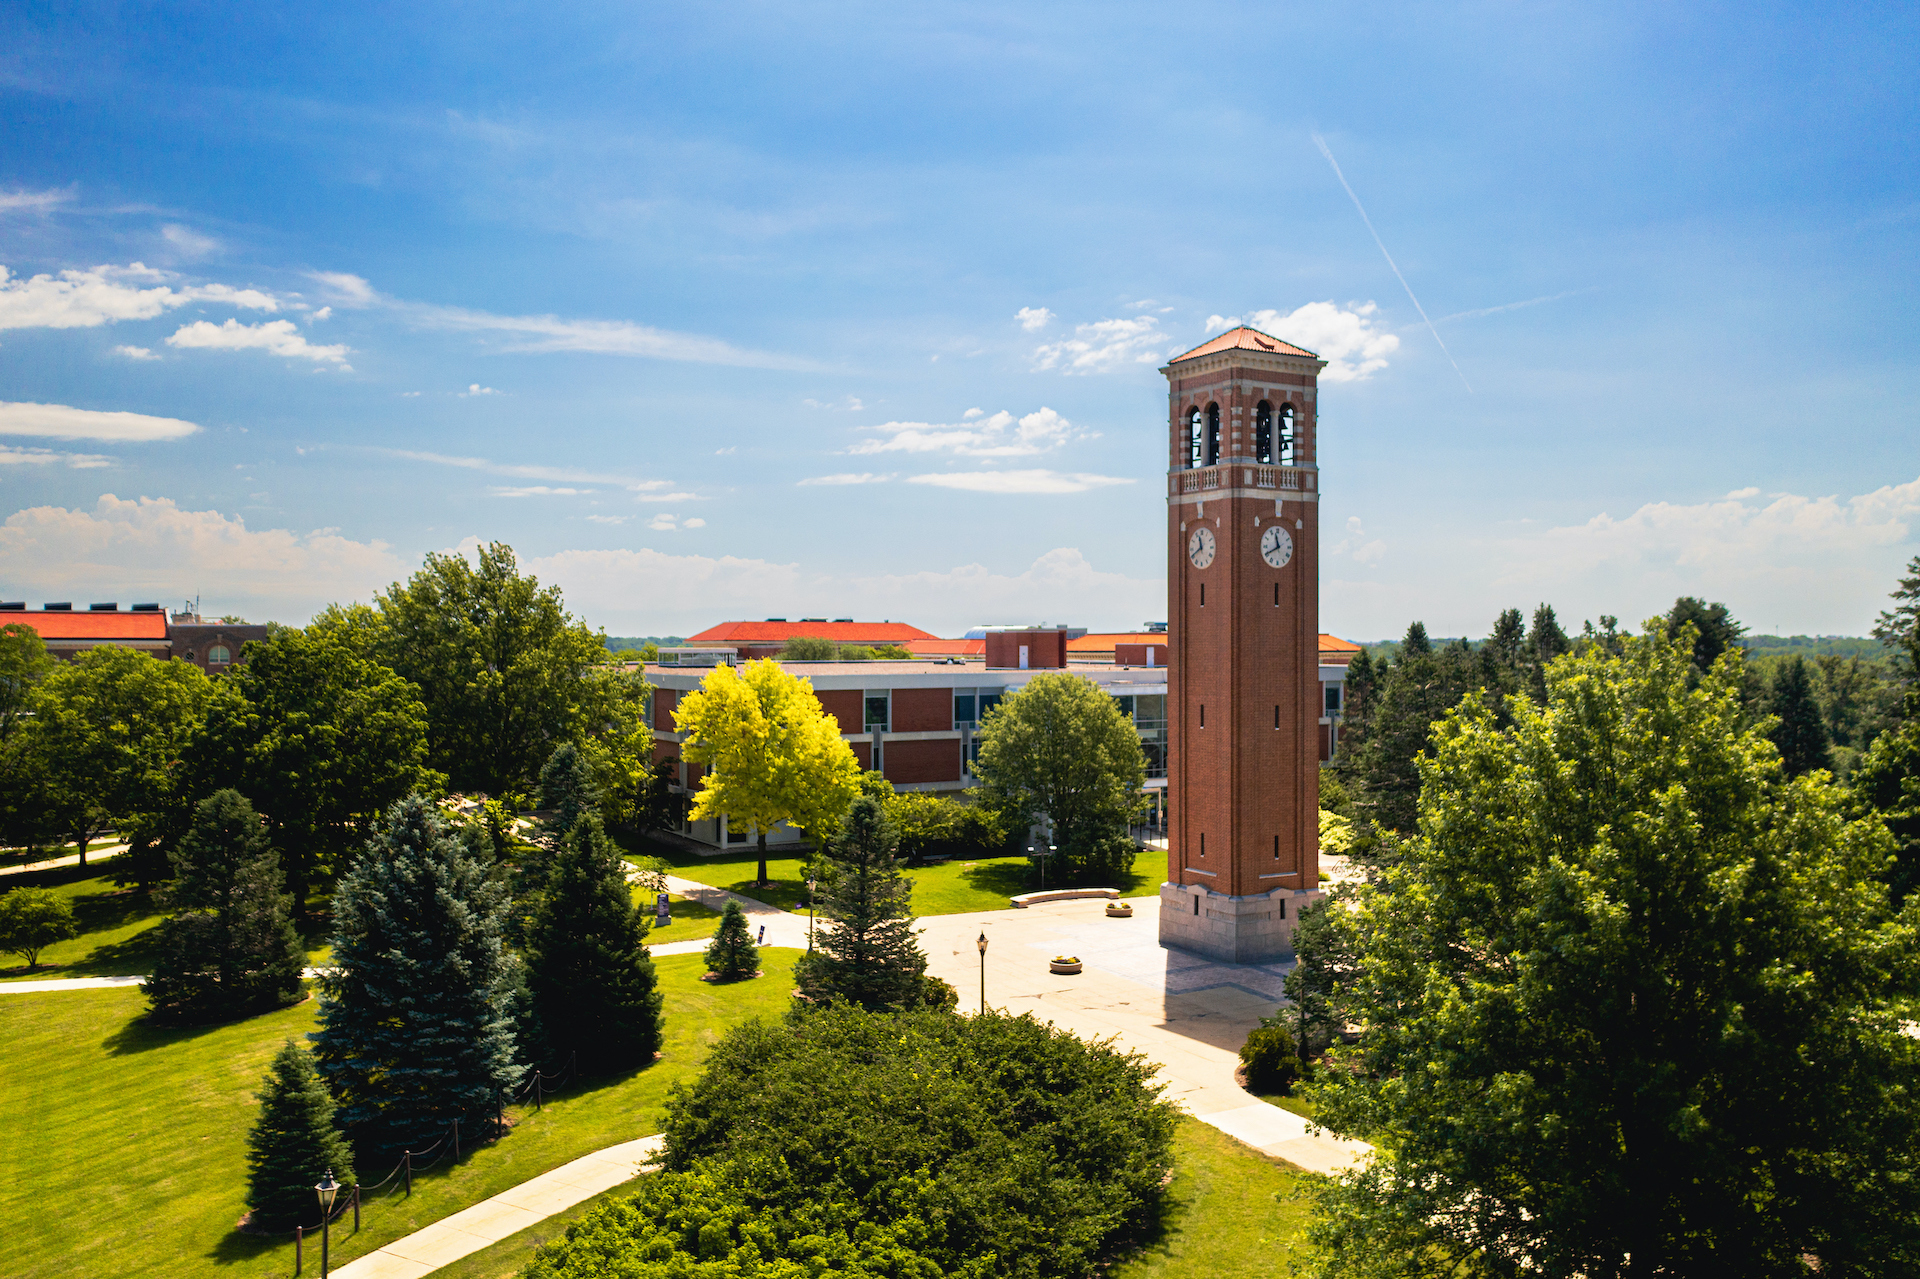 Campanile on a summer day.